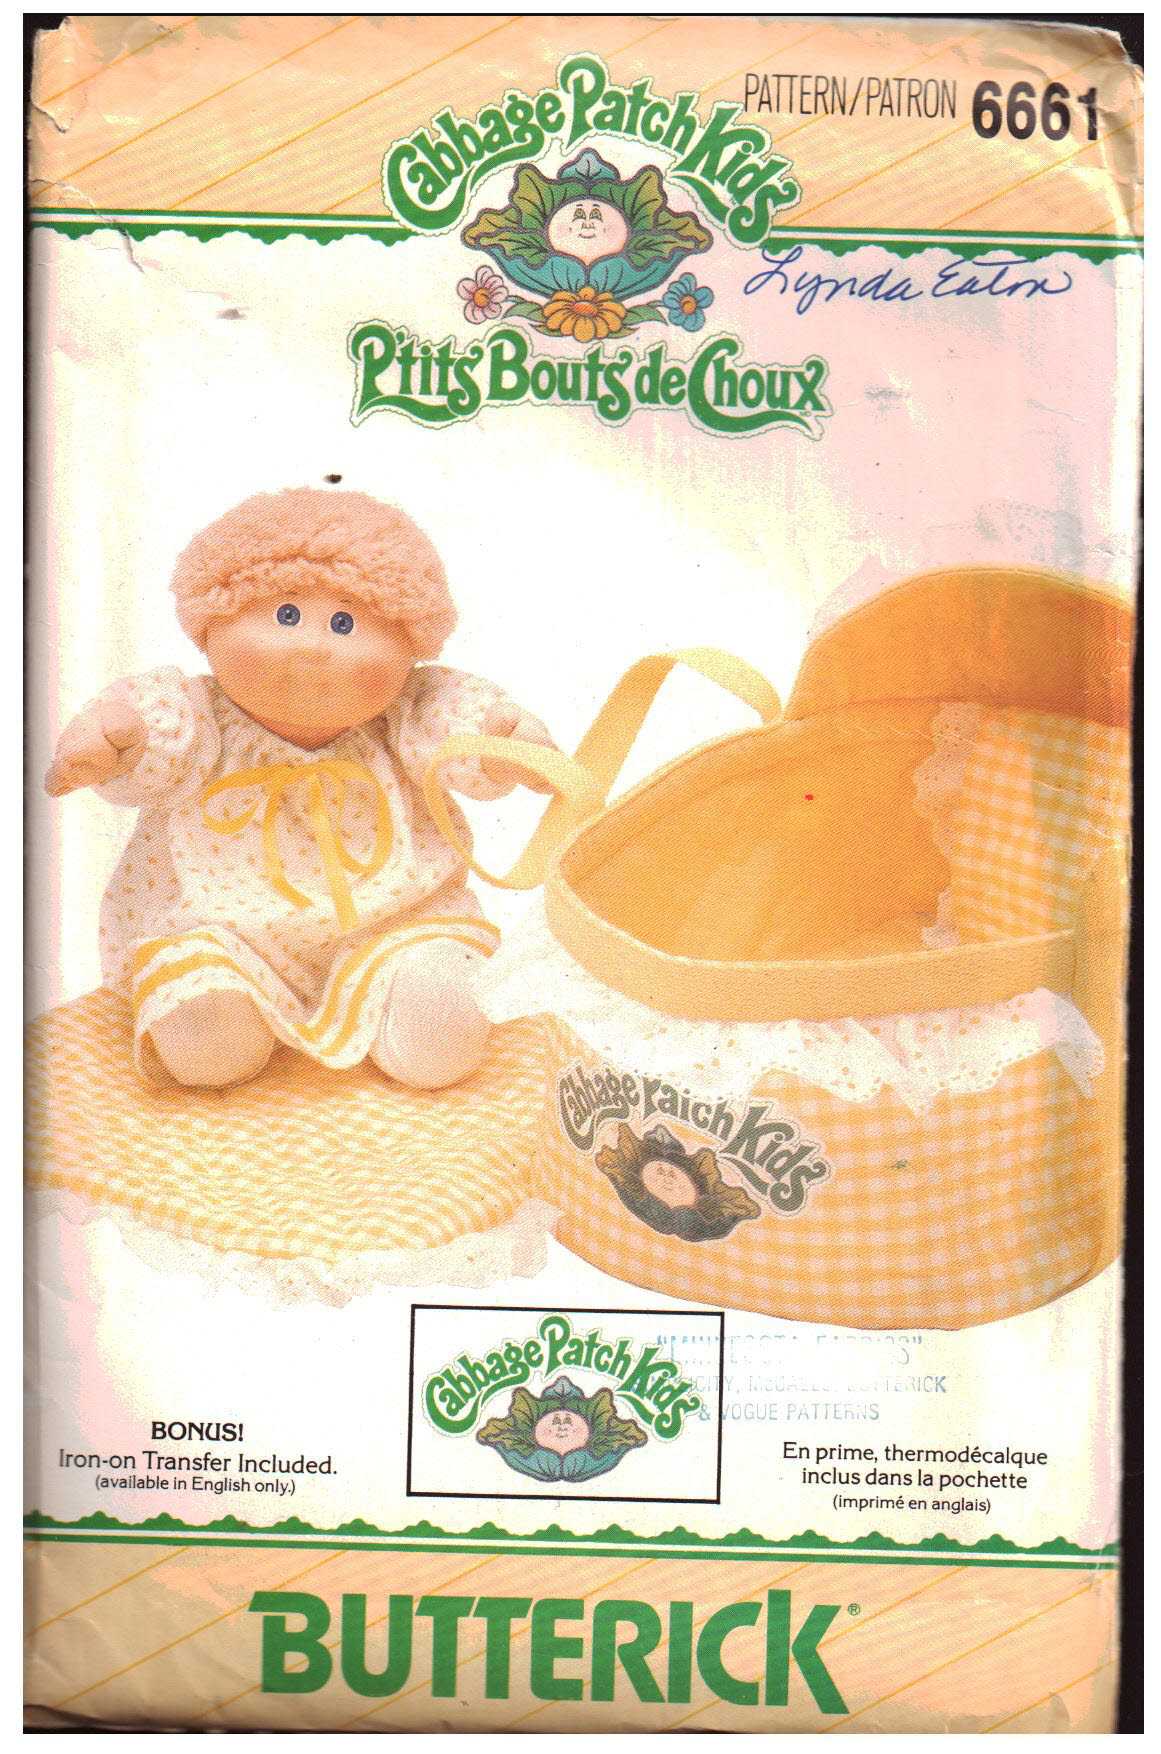 butterick cabbage patch doll clothes